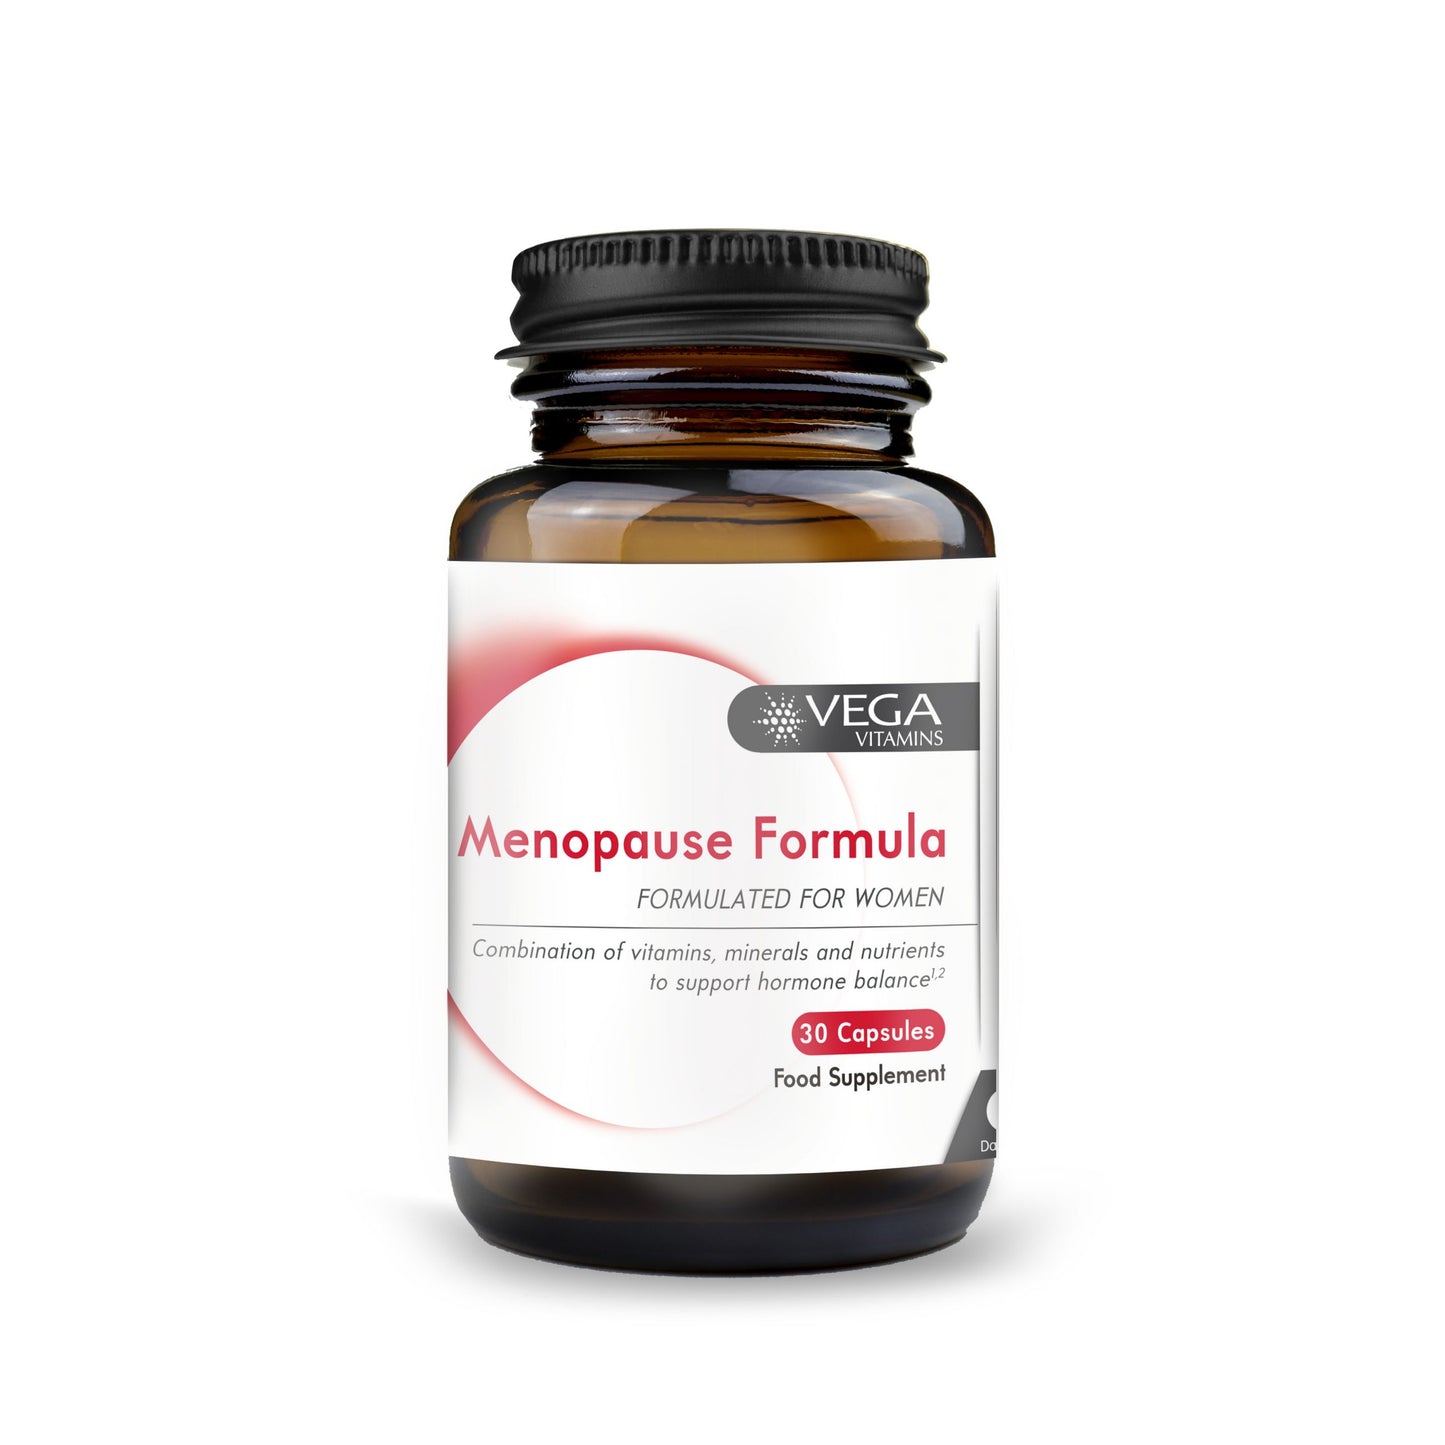 Menopause Formula - Formulated For Women